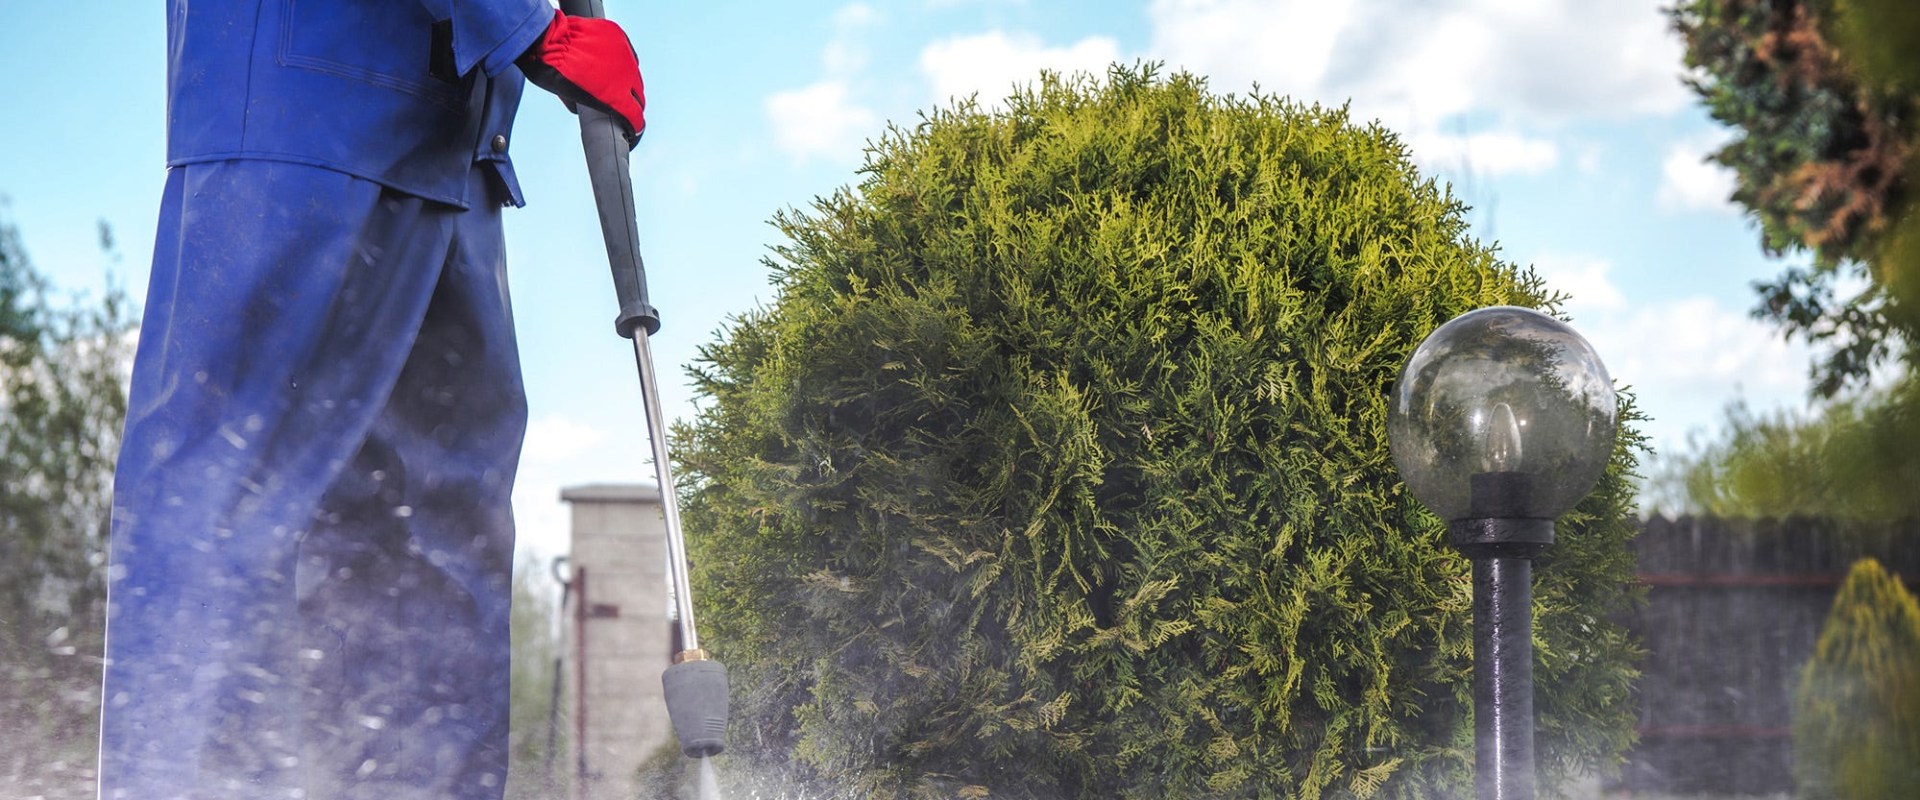 What are the osha regulations for pressure washing?